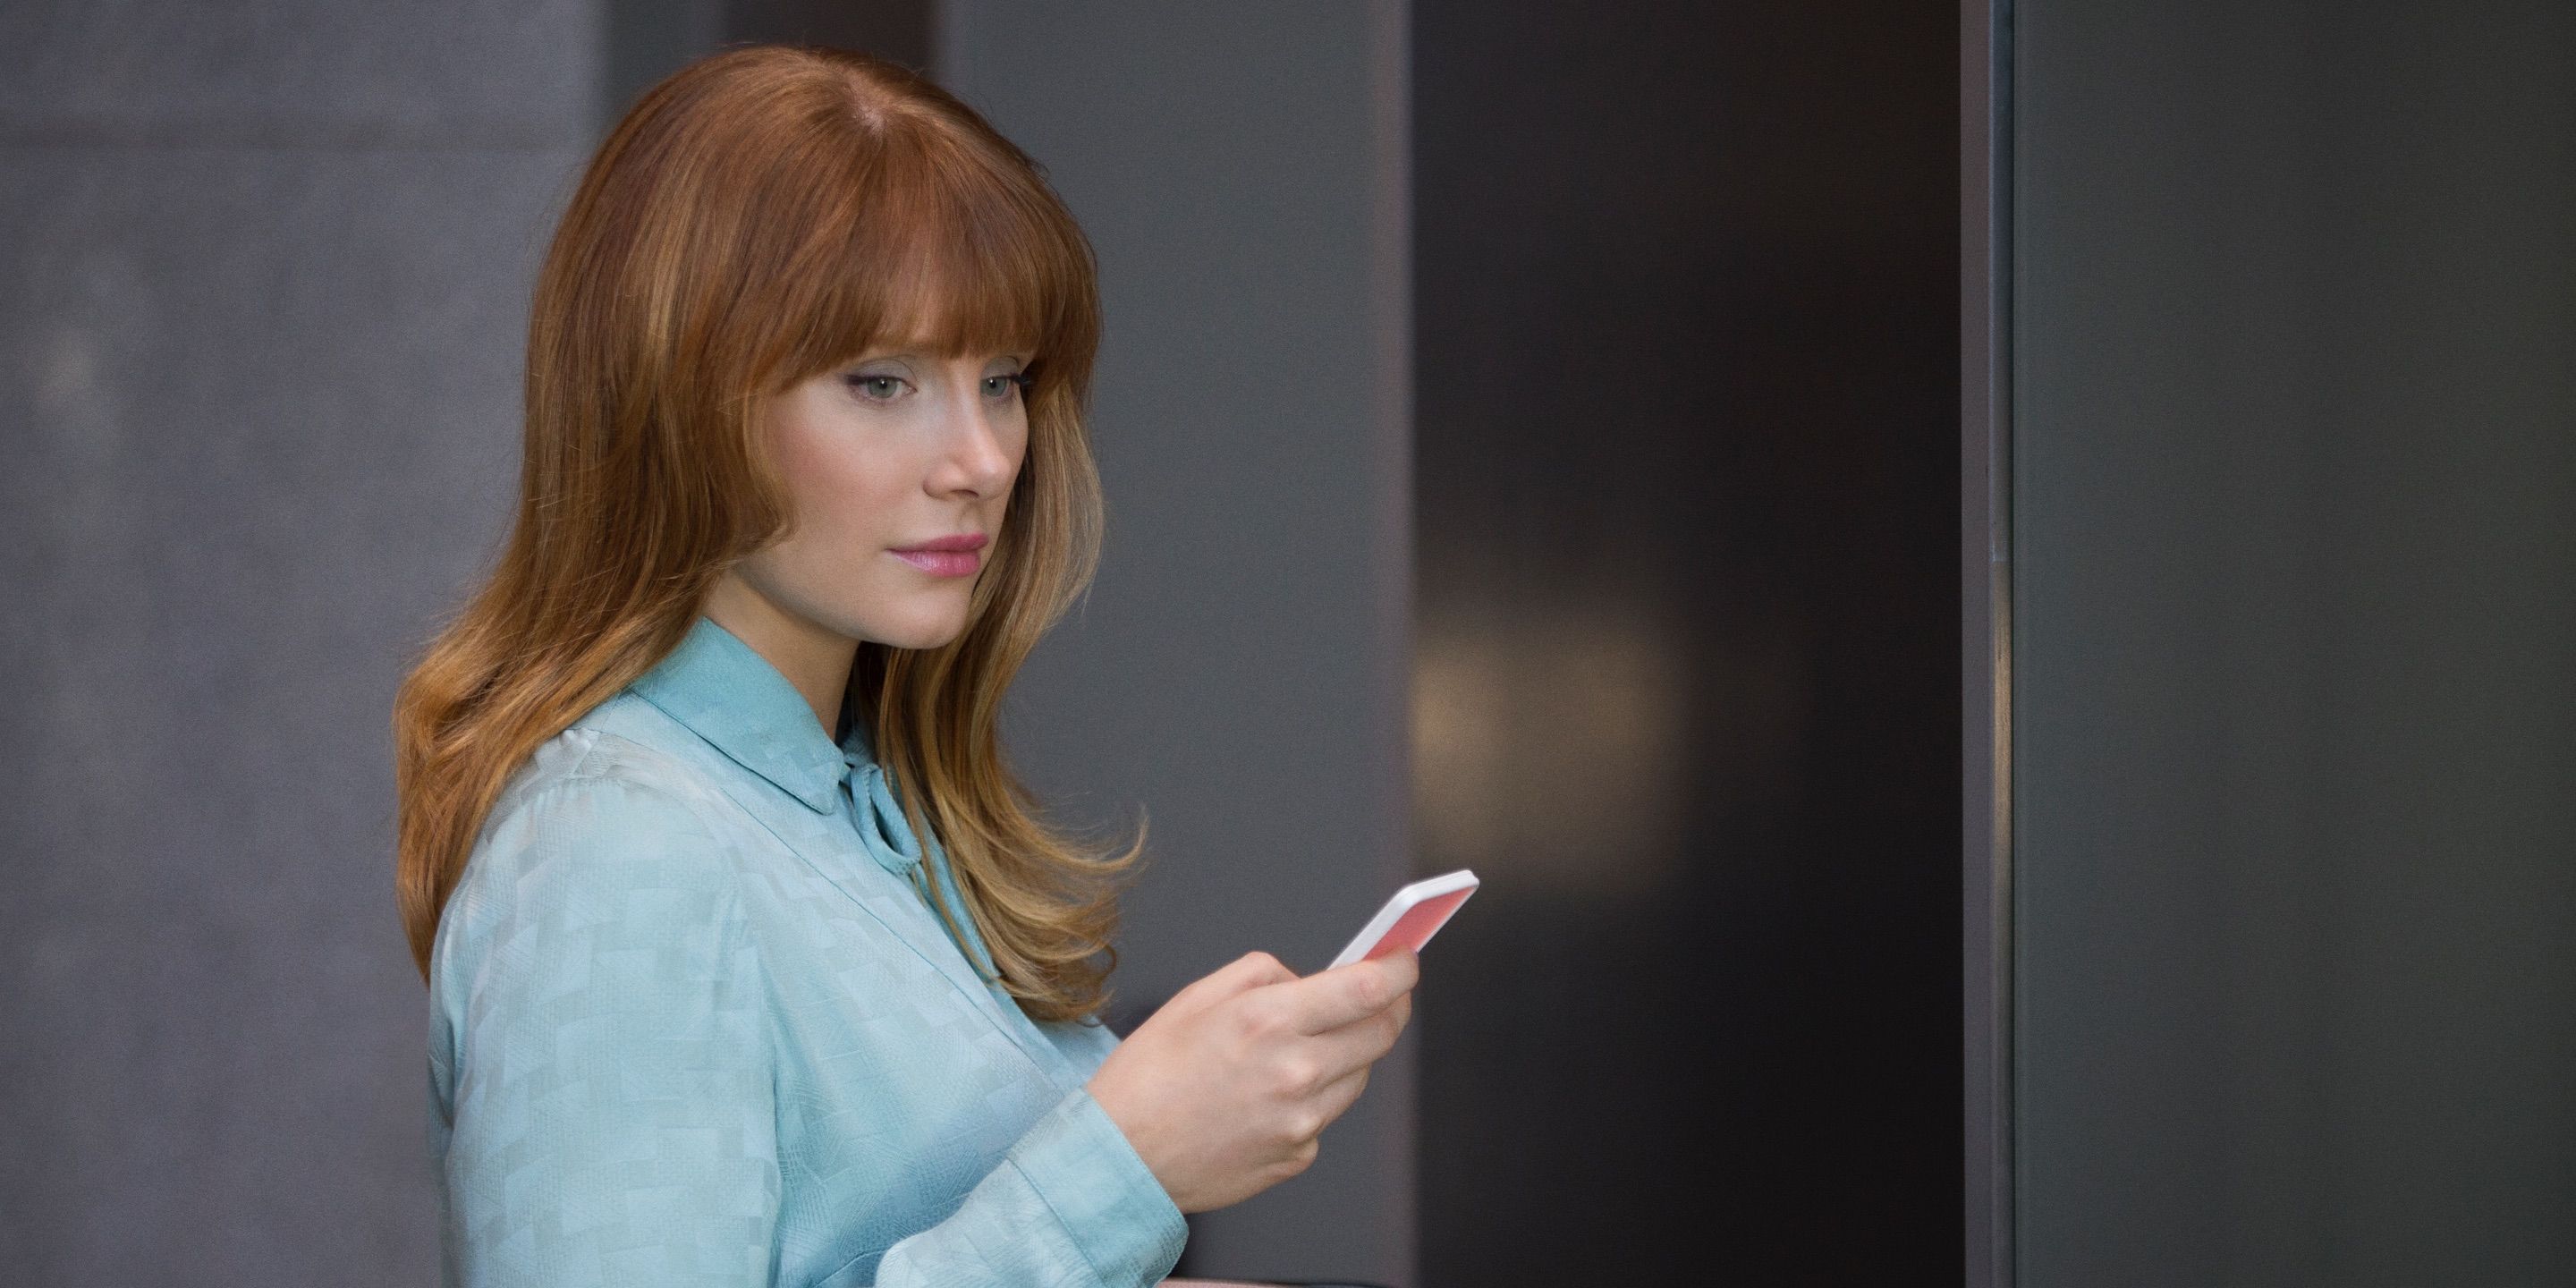 Black Mirror Season 3 Trailer: It’s Easy to Lose Sight of What’s Real